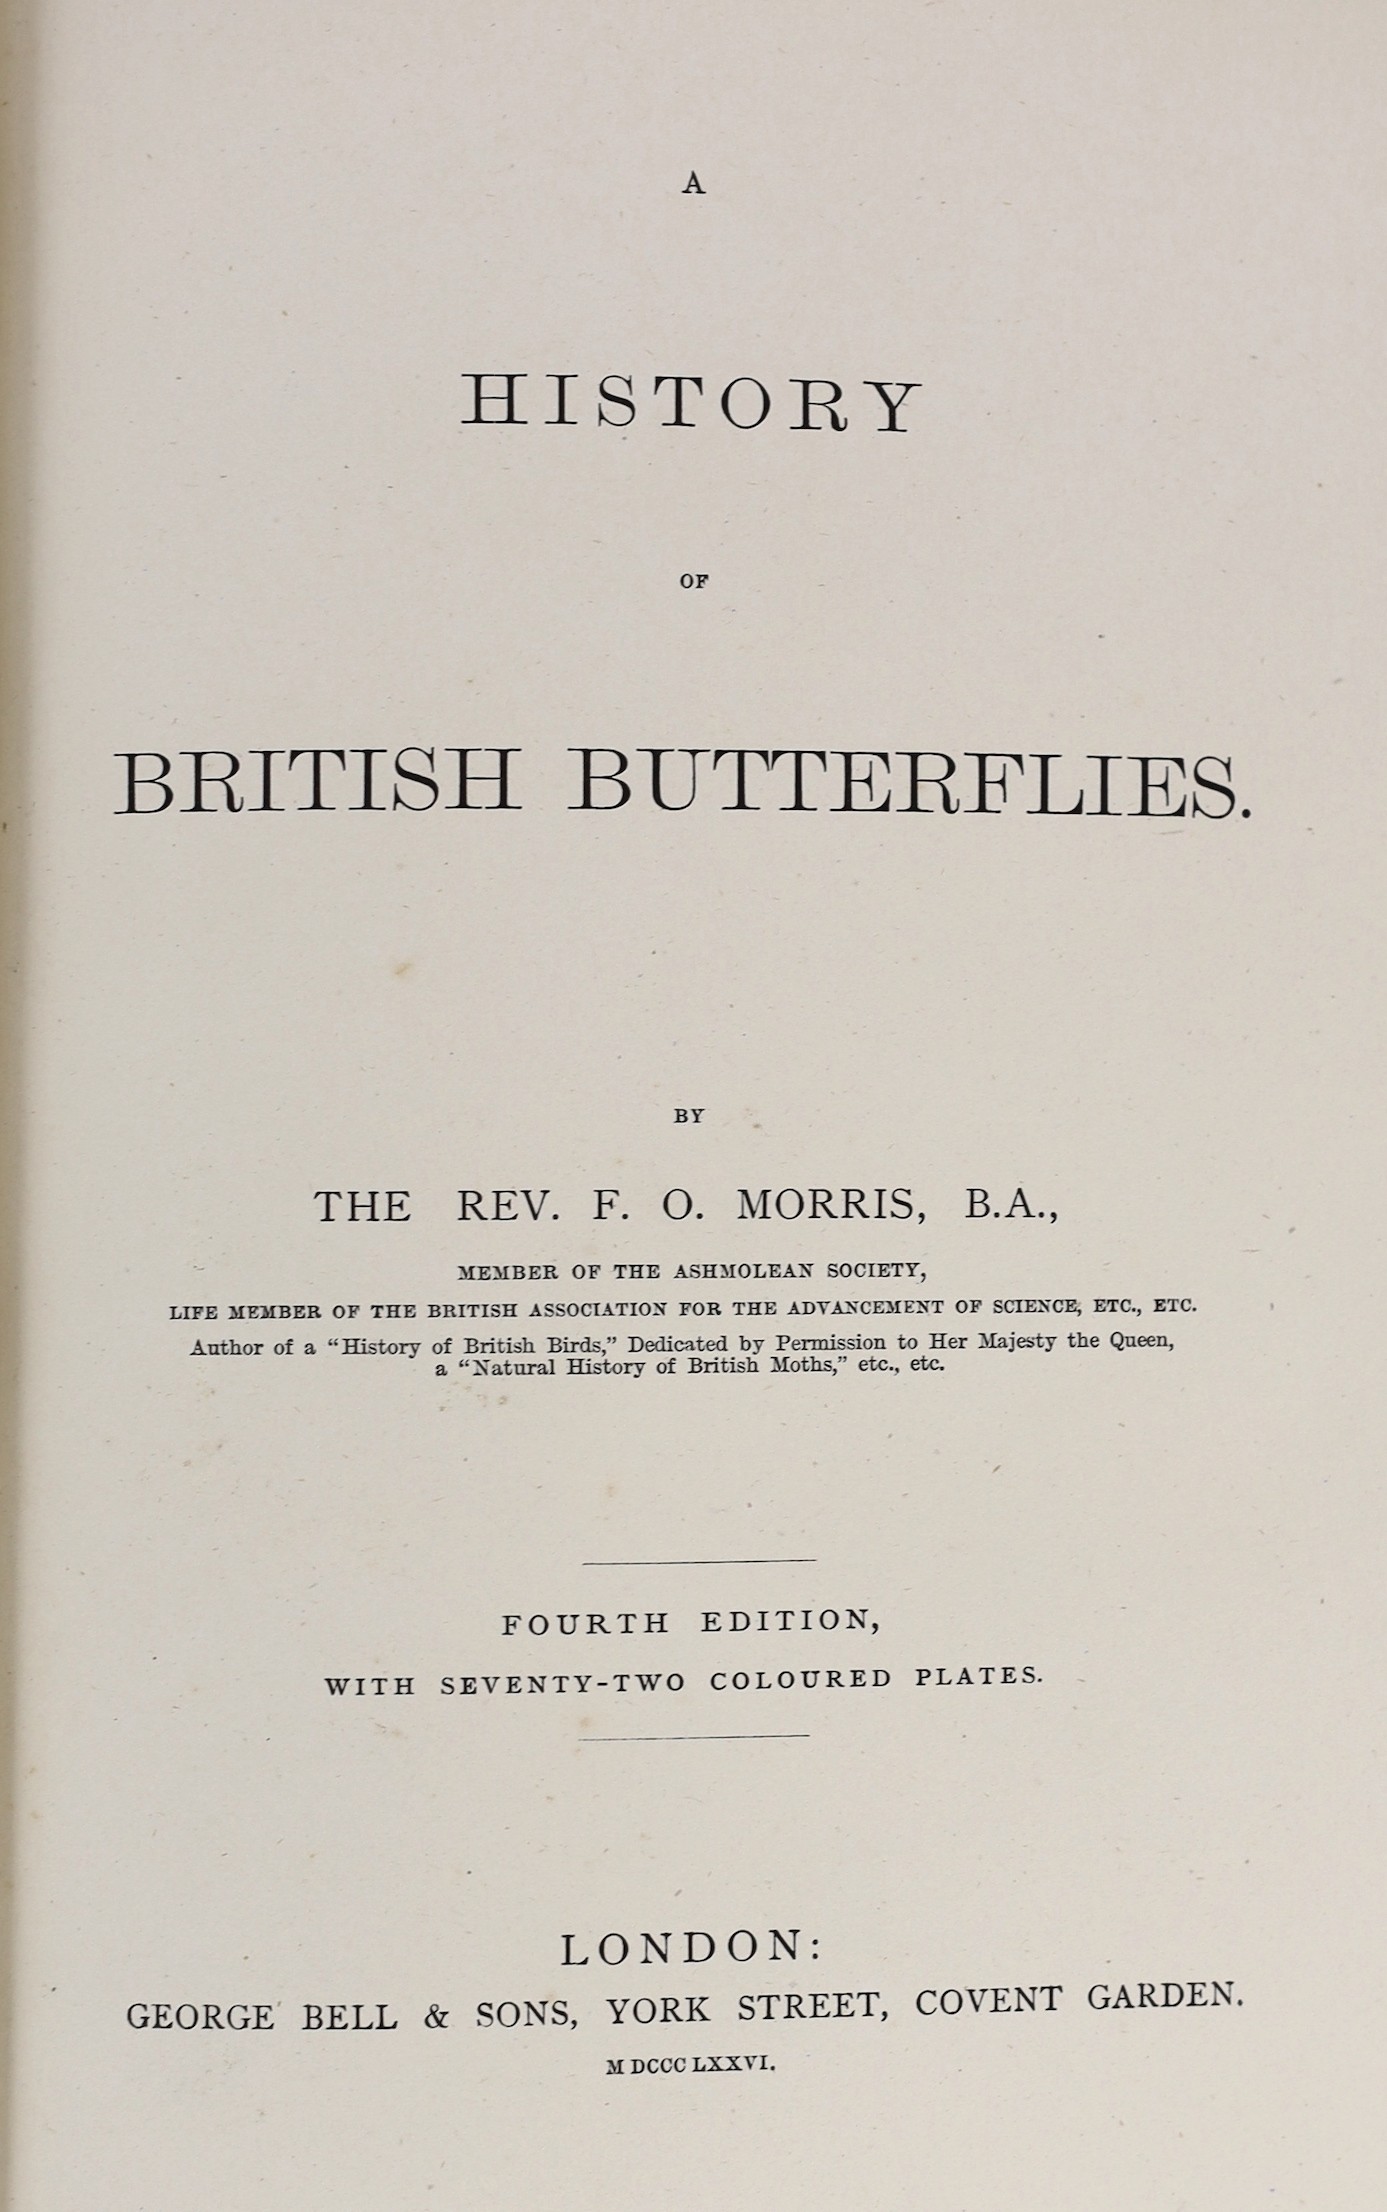 Morris, Rev. Francis Orpen - A History of British Butterflies. 4th edition. 72 hand coloured and 2 other plates. contemp. half morocco and marble boards, gilt decorated and panelled spine, ge. and marbled e/ps., 4 to. 18